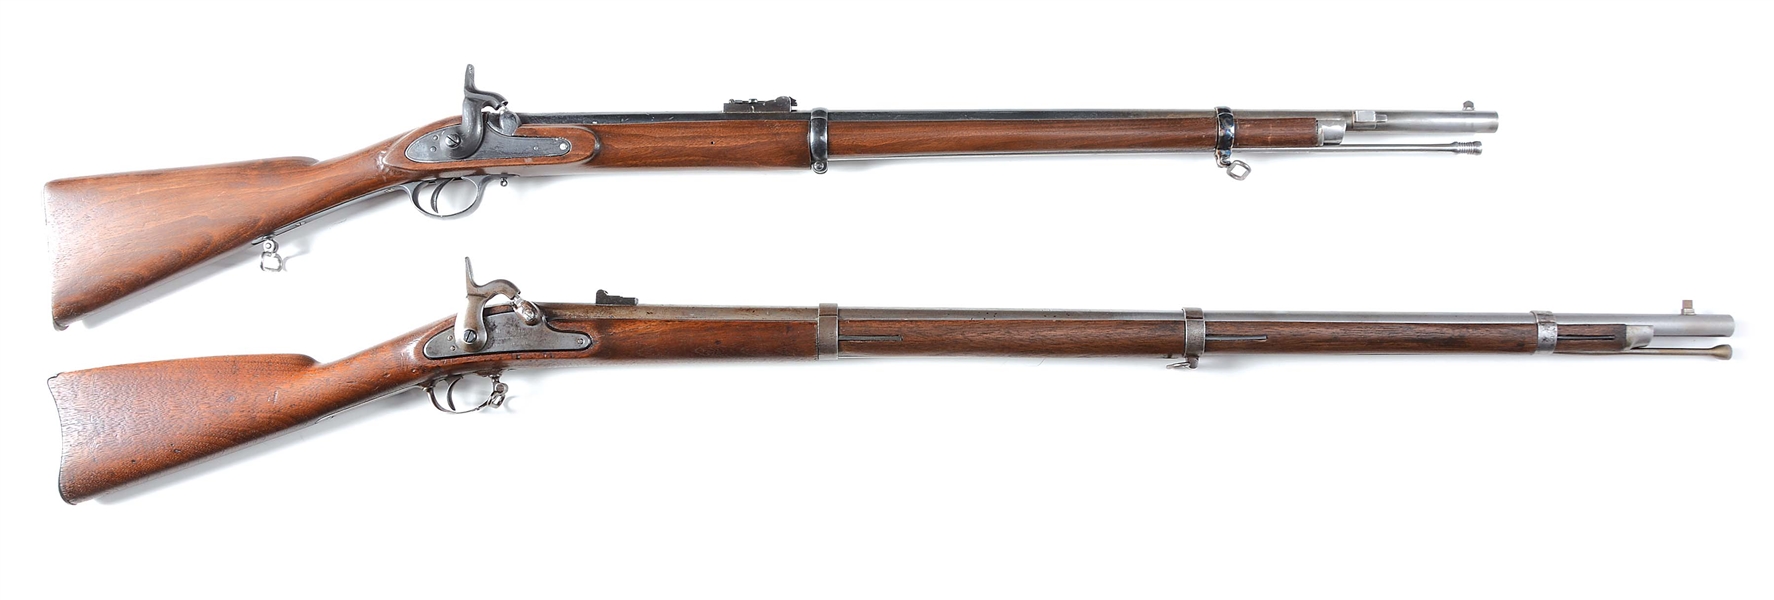 (A) LOT OF 2: BRITISH 1853 ENFIELD MUSKET & 1861 PROVIDENCE MUSKET.